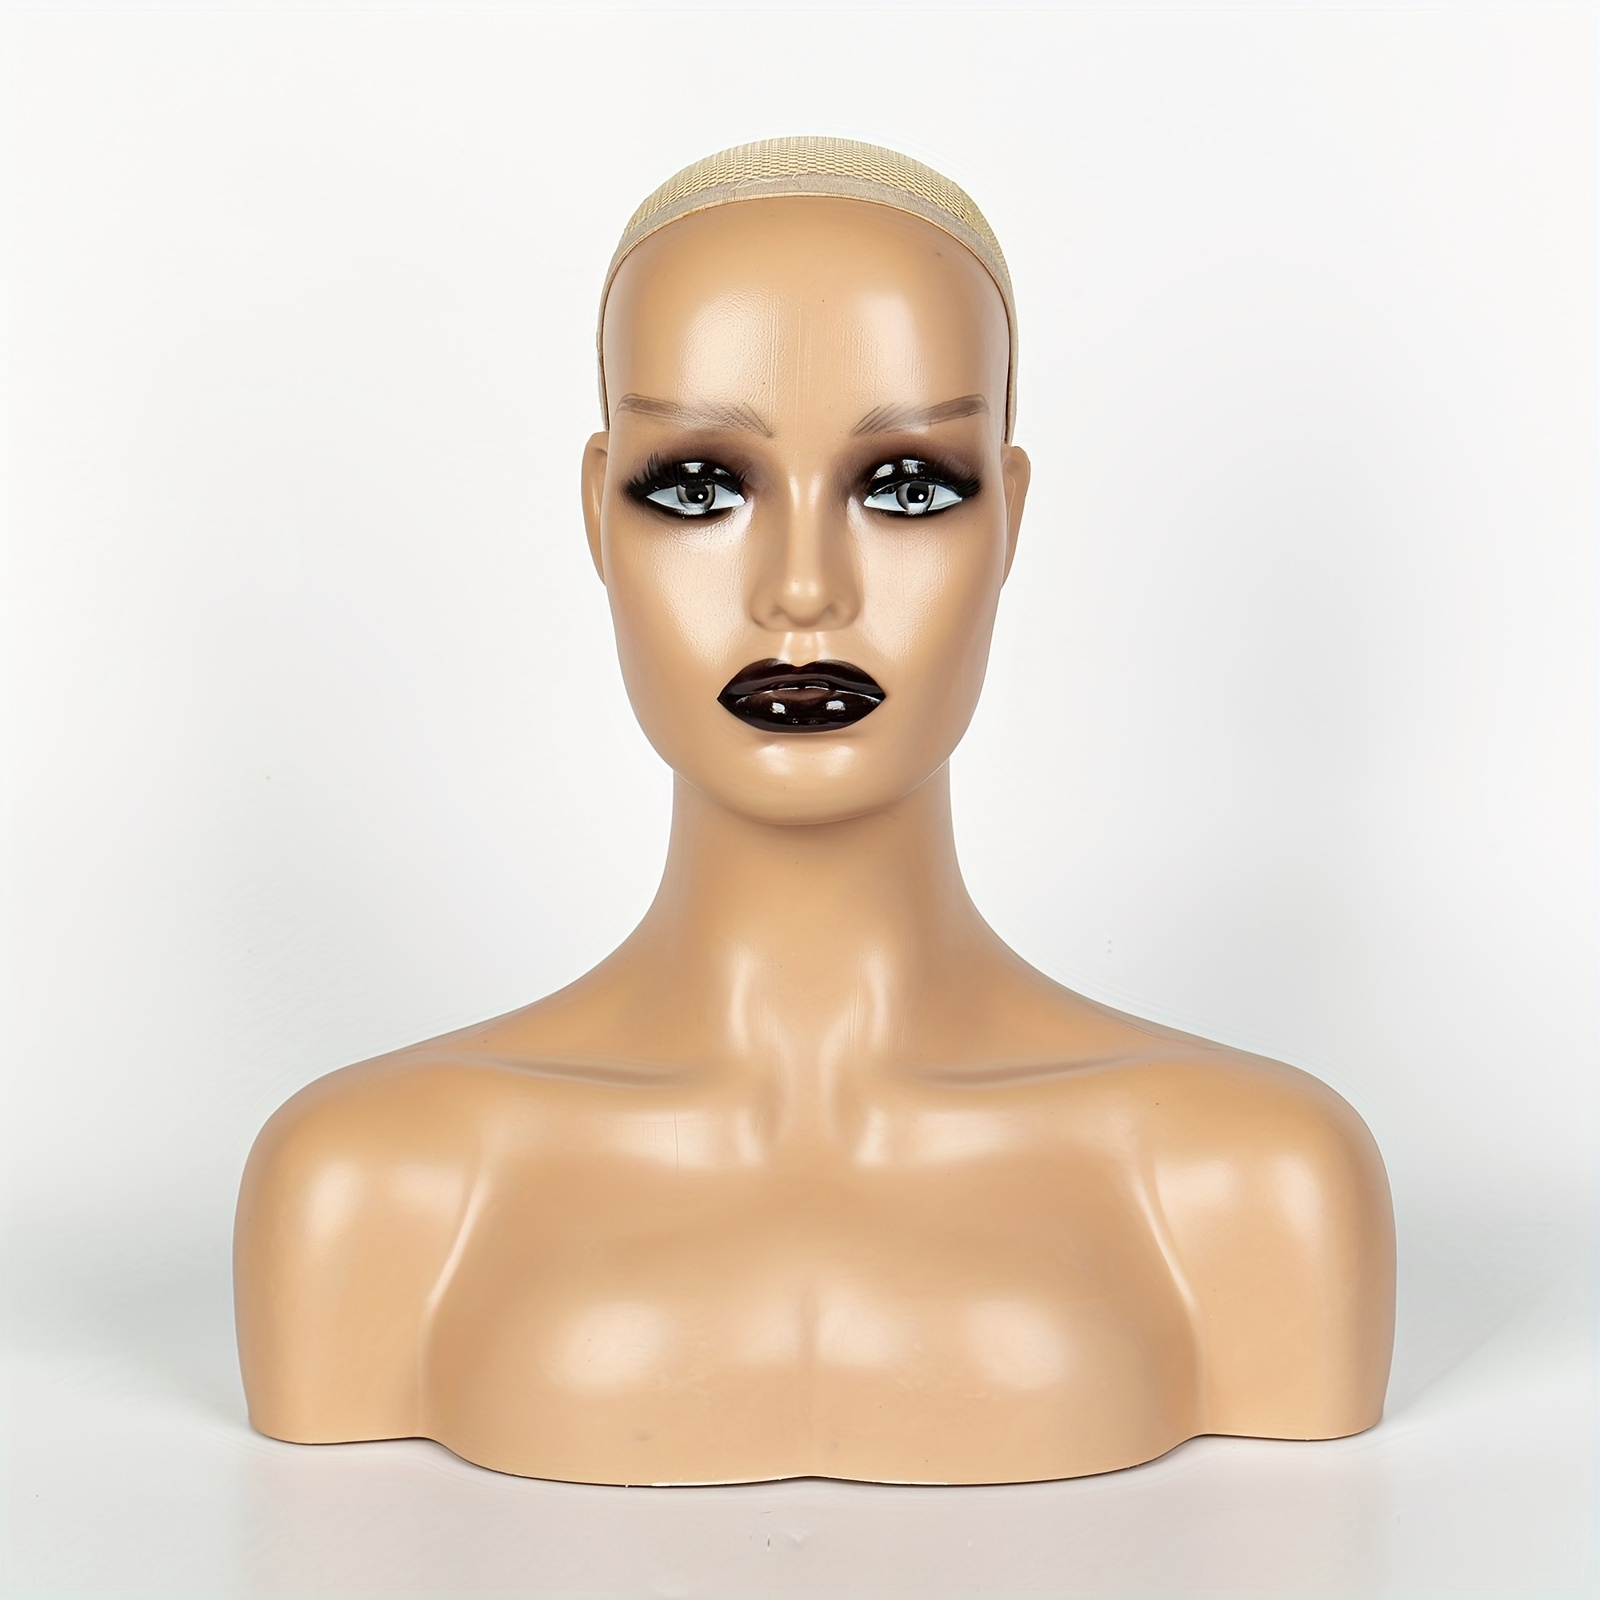 Realistic Female Mannequin Head with Shoulder Manikin PVC Head Bust Wig  Head Stand for Wigs Display Making,Styling,Sunglasses,Necklace Earrings,  Light